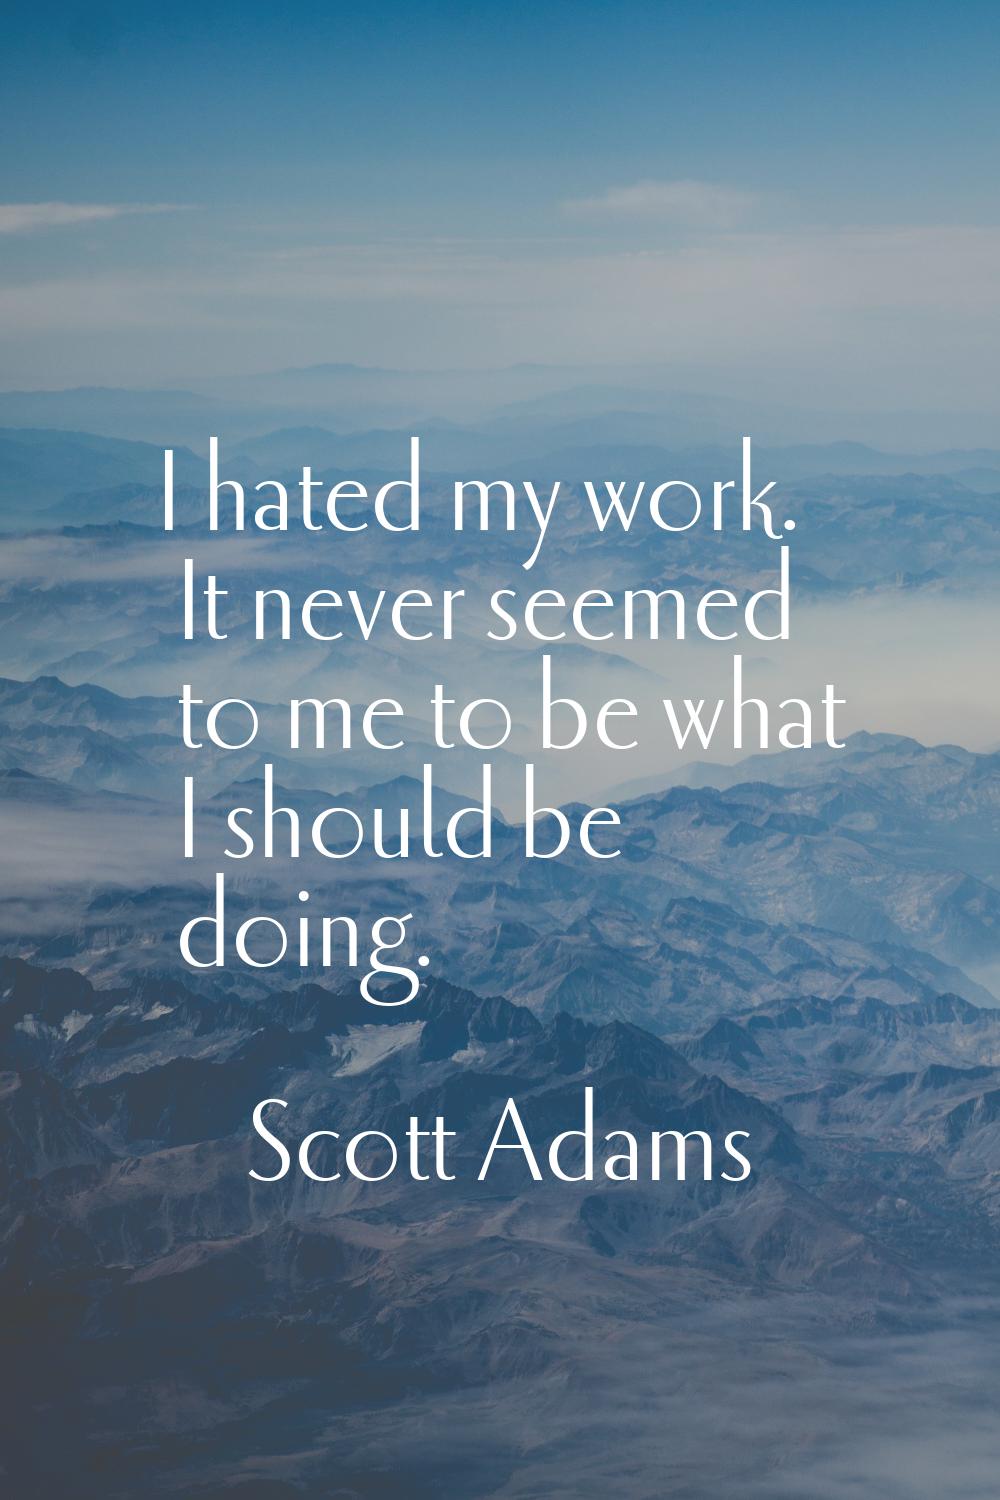 I hated my work. It never seemed to me to be what I should be doing.